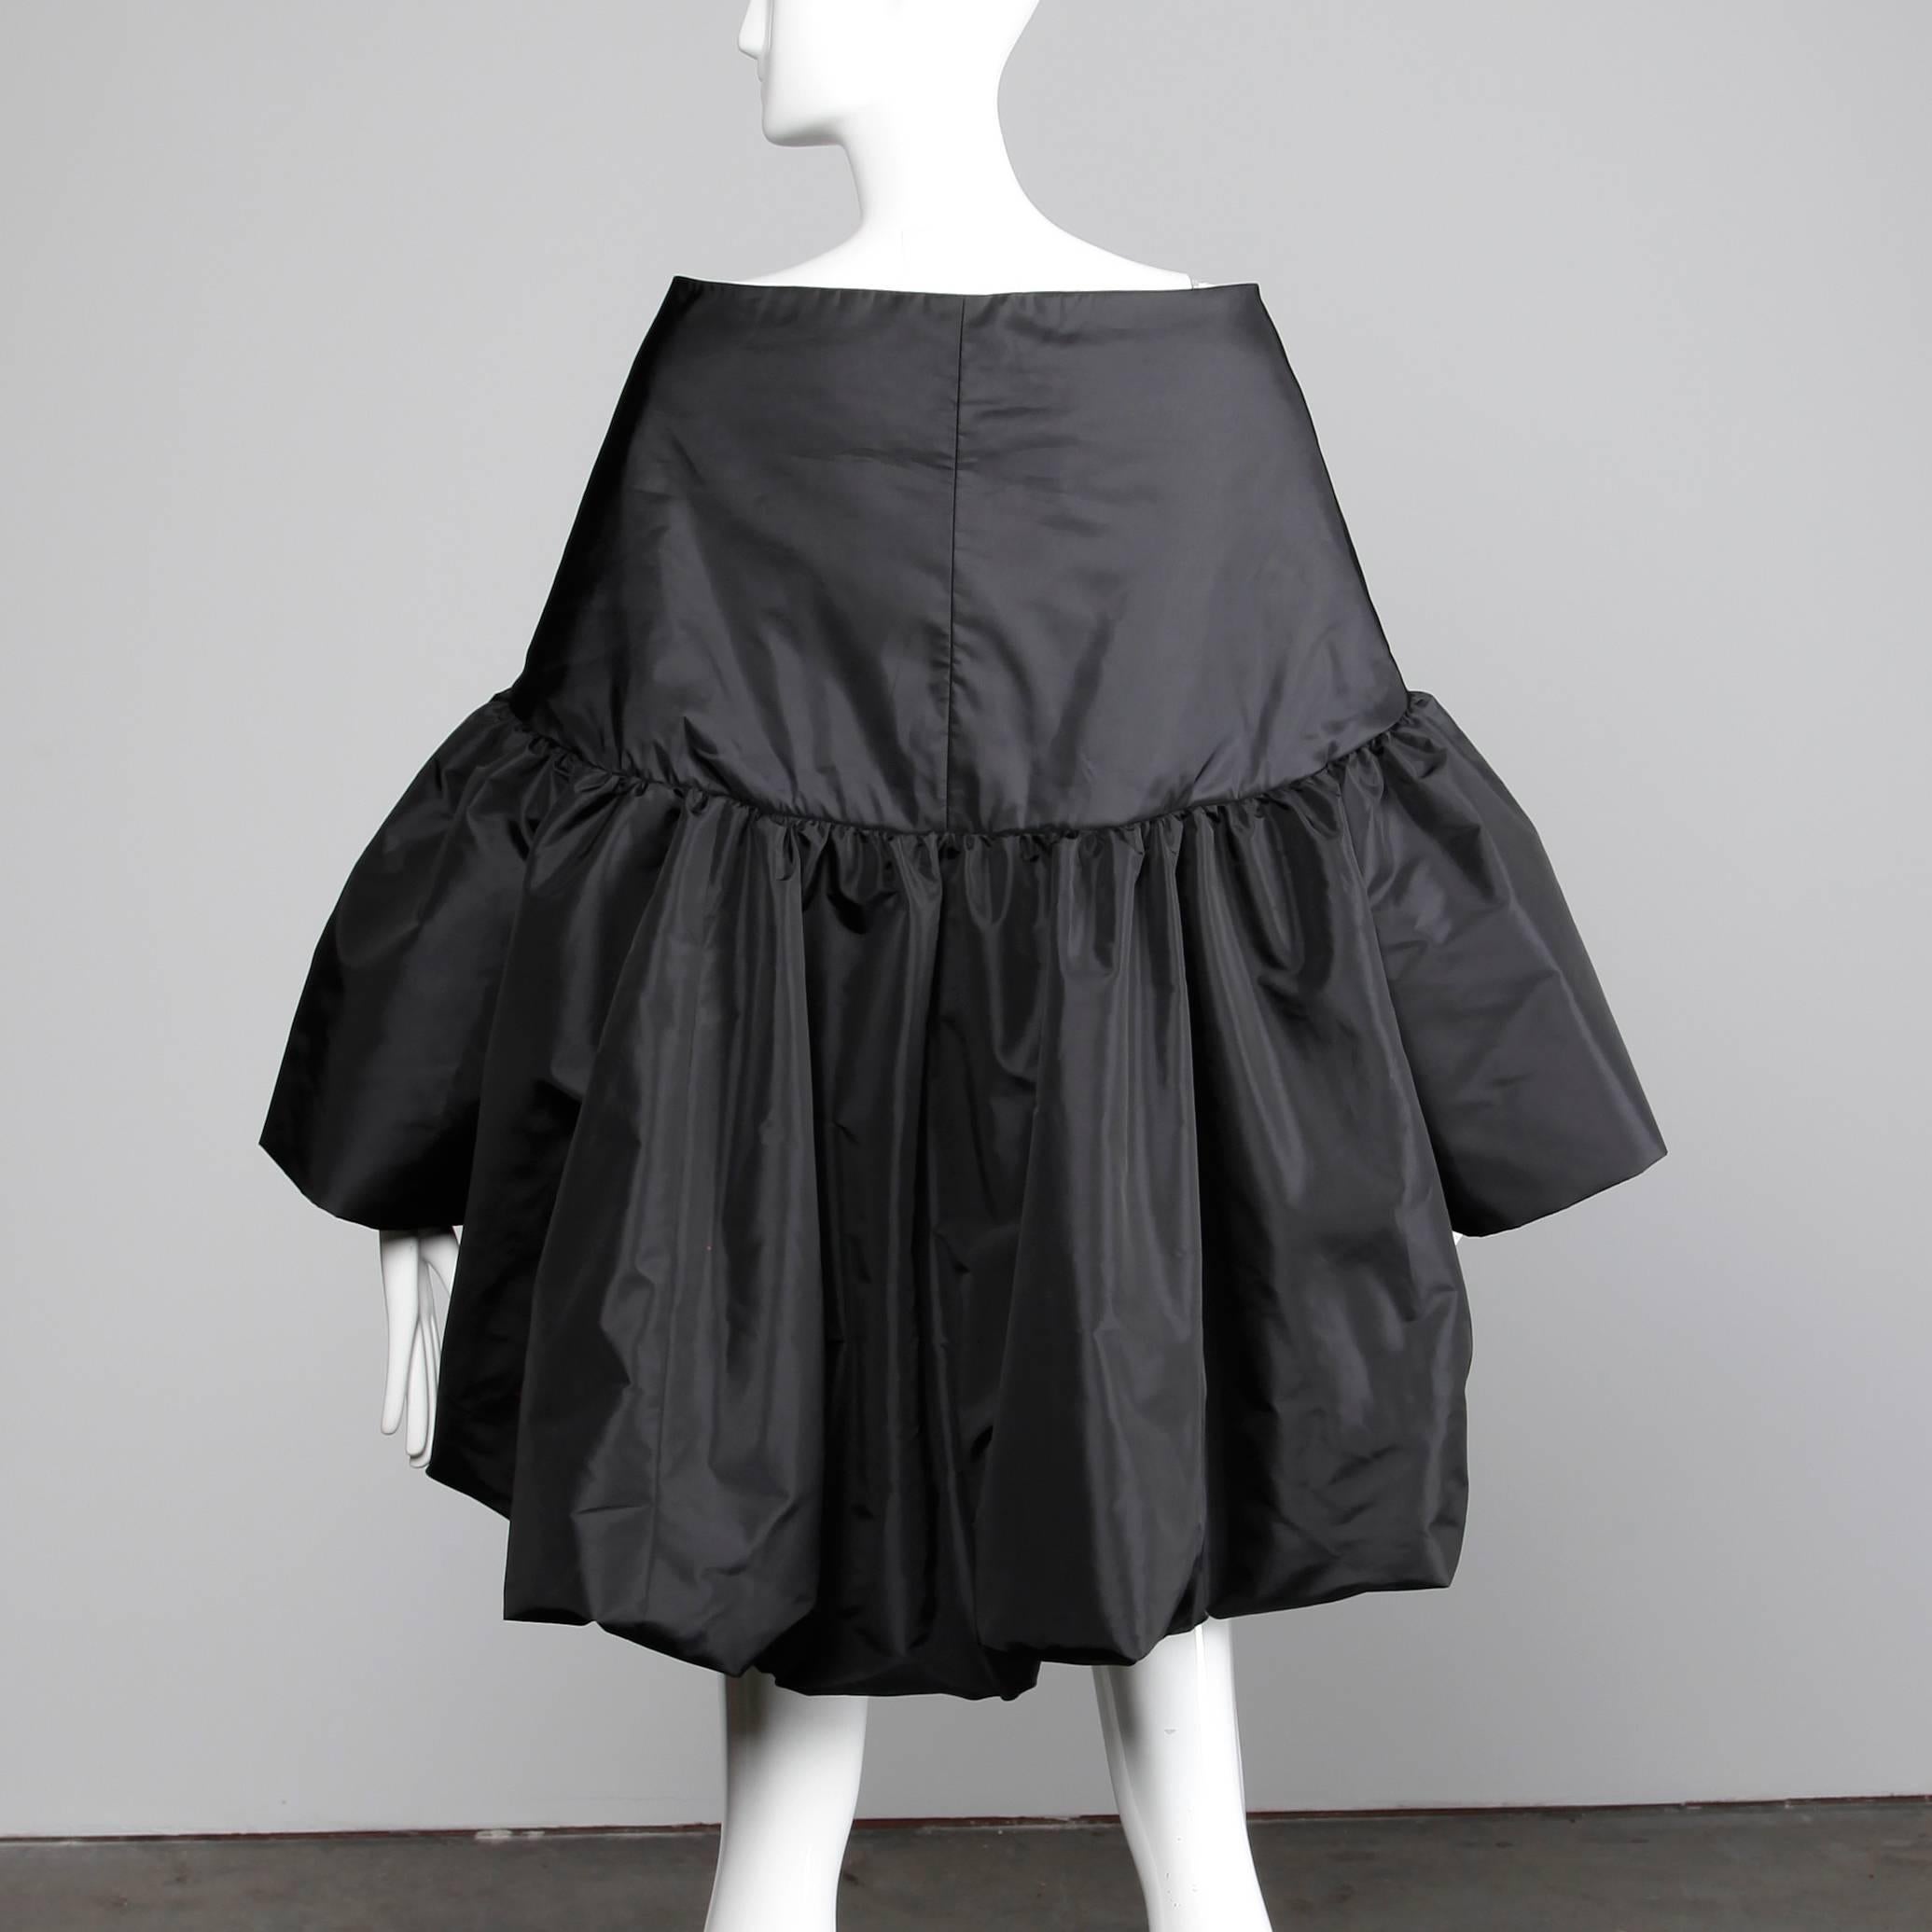 Amazing Victor Costa Black Taffeta Opera Cape Coat or Jacket with Bell Sleeves 1